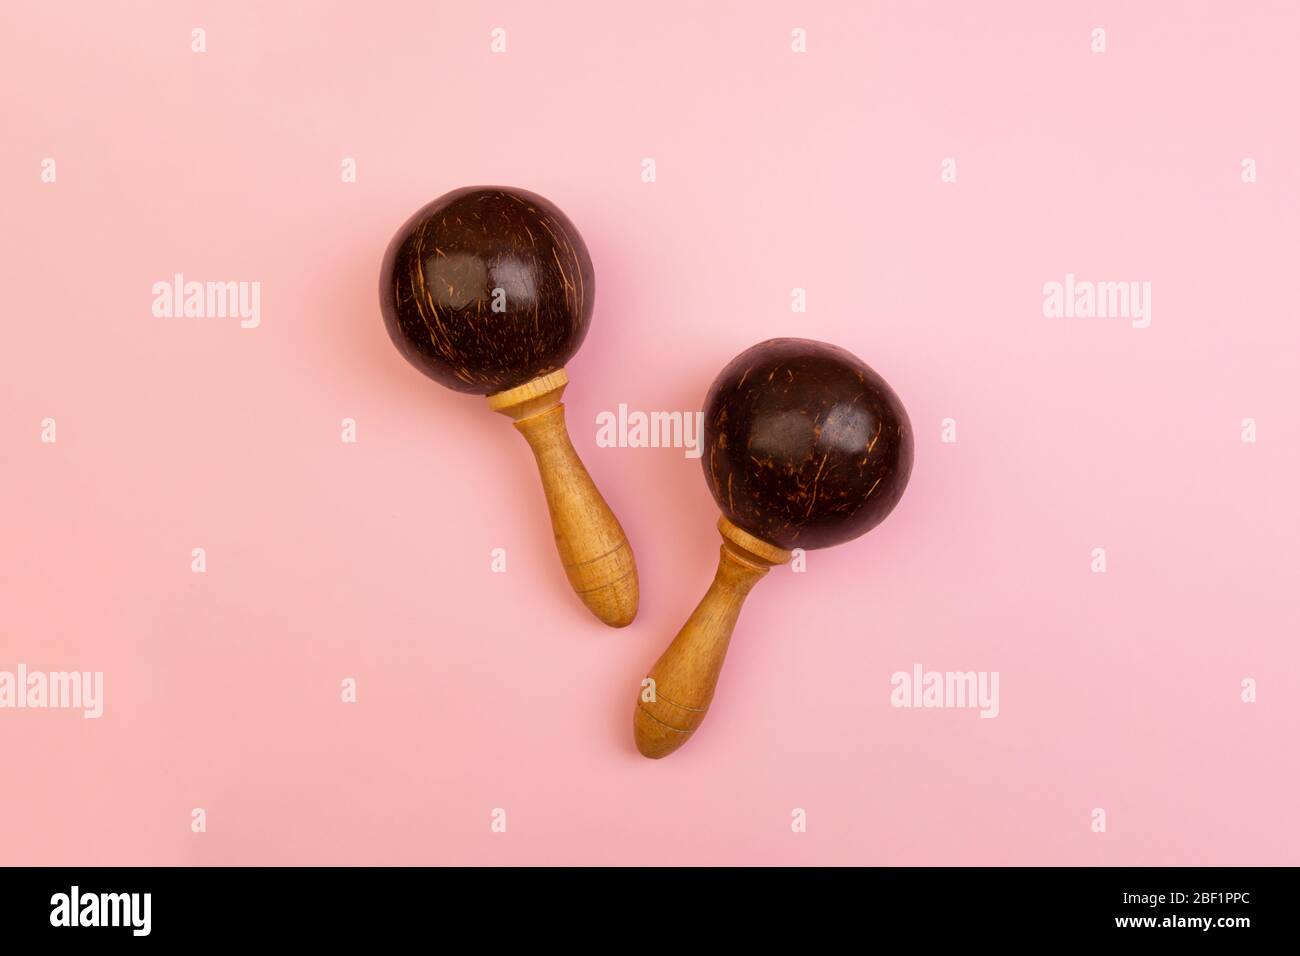 Two mexican maracas isolated on pink background. Traditional folk musical instruments. Elements of national culture. Flat lay. Latin music. Stock Photo